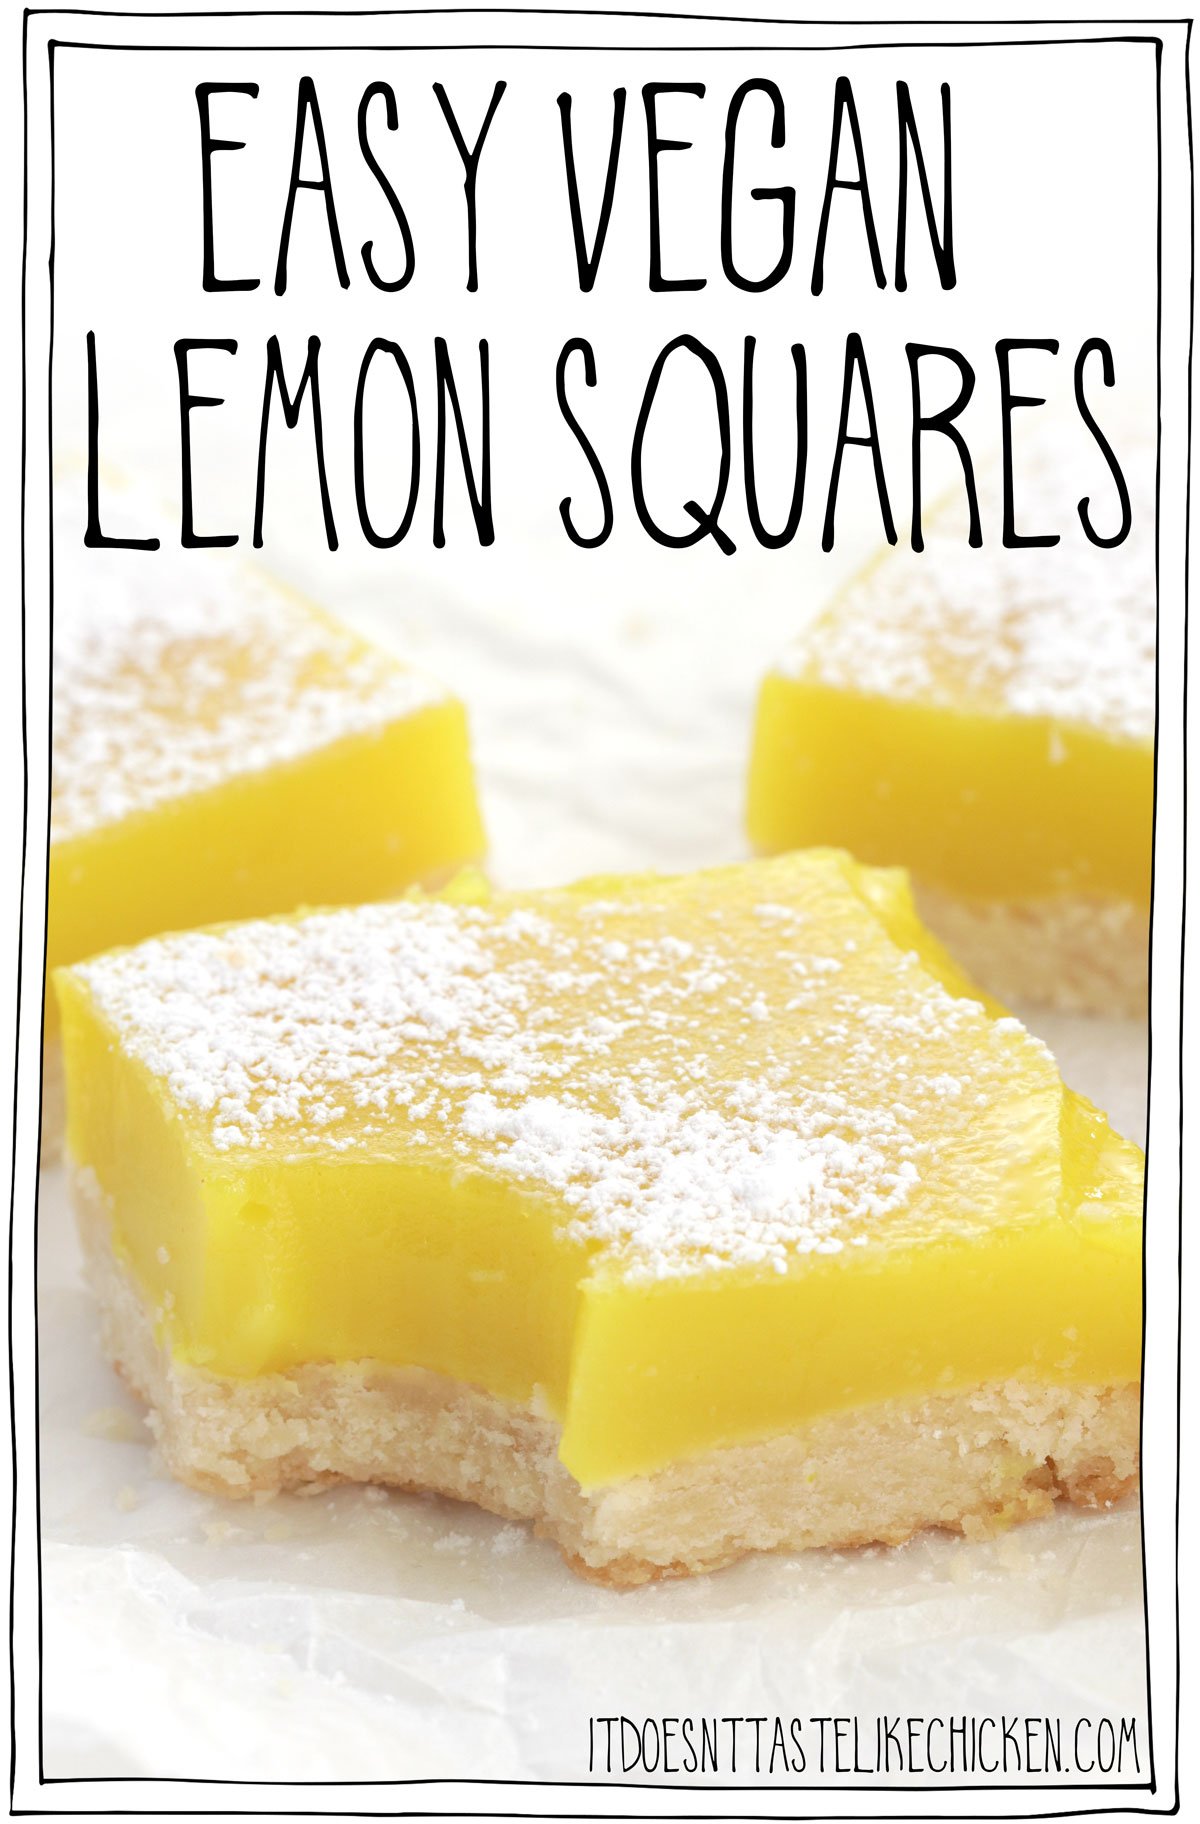 Easy Vegan Lemon Squares! These lemon bars are so easy to make and are a perfect combination of fresh, tart lemon curd and a crumbly, buttery shortbread crust. Sweet and buttery and perfect for an Easter treat or a spring dessert. #itdoesnttastelikechicken #veganrecipes #vegandesserts